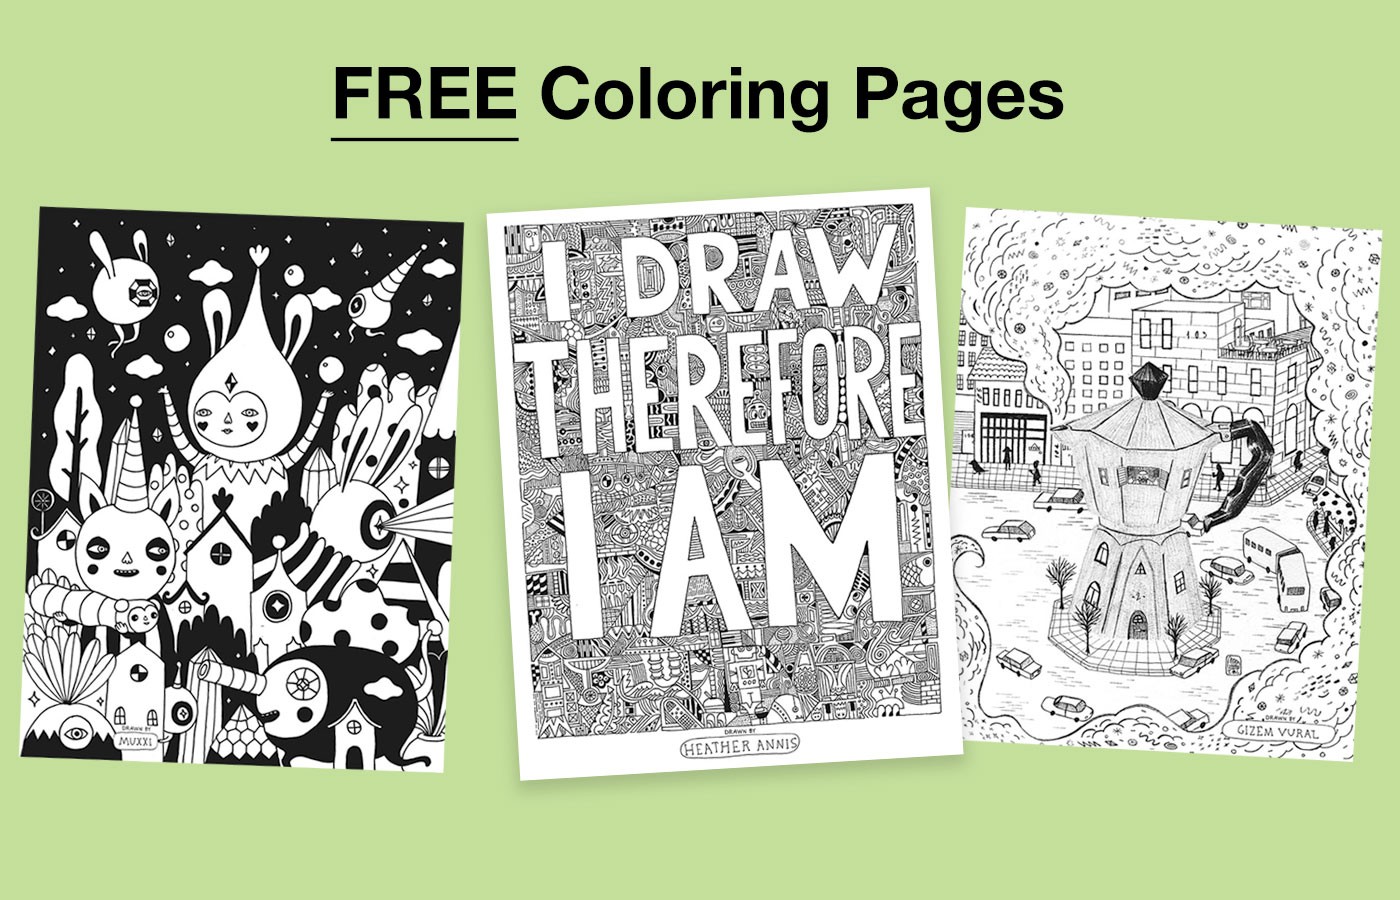 Free coloring book pages.